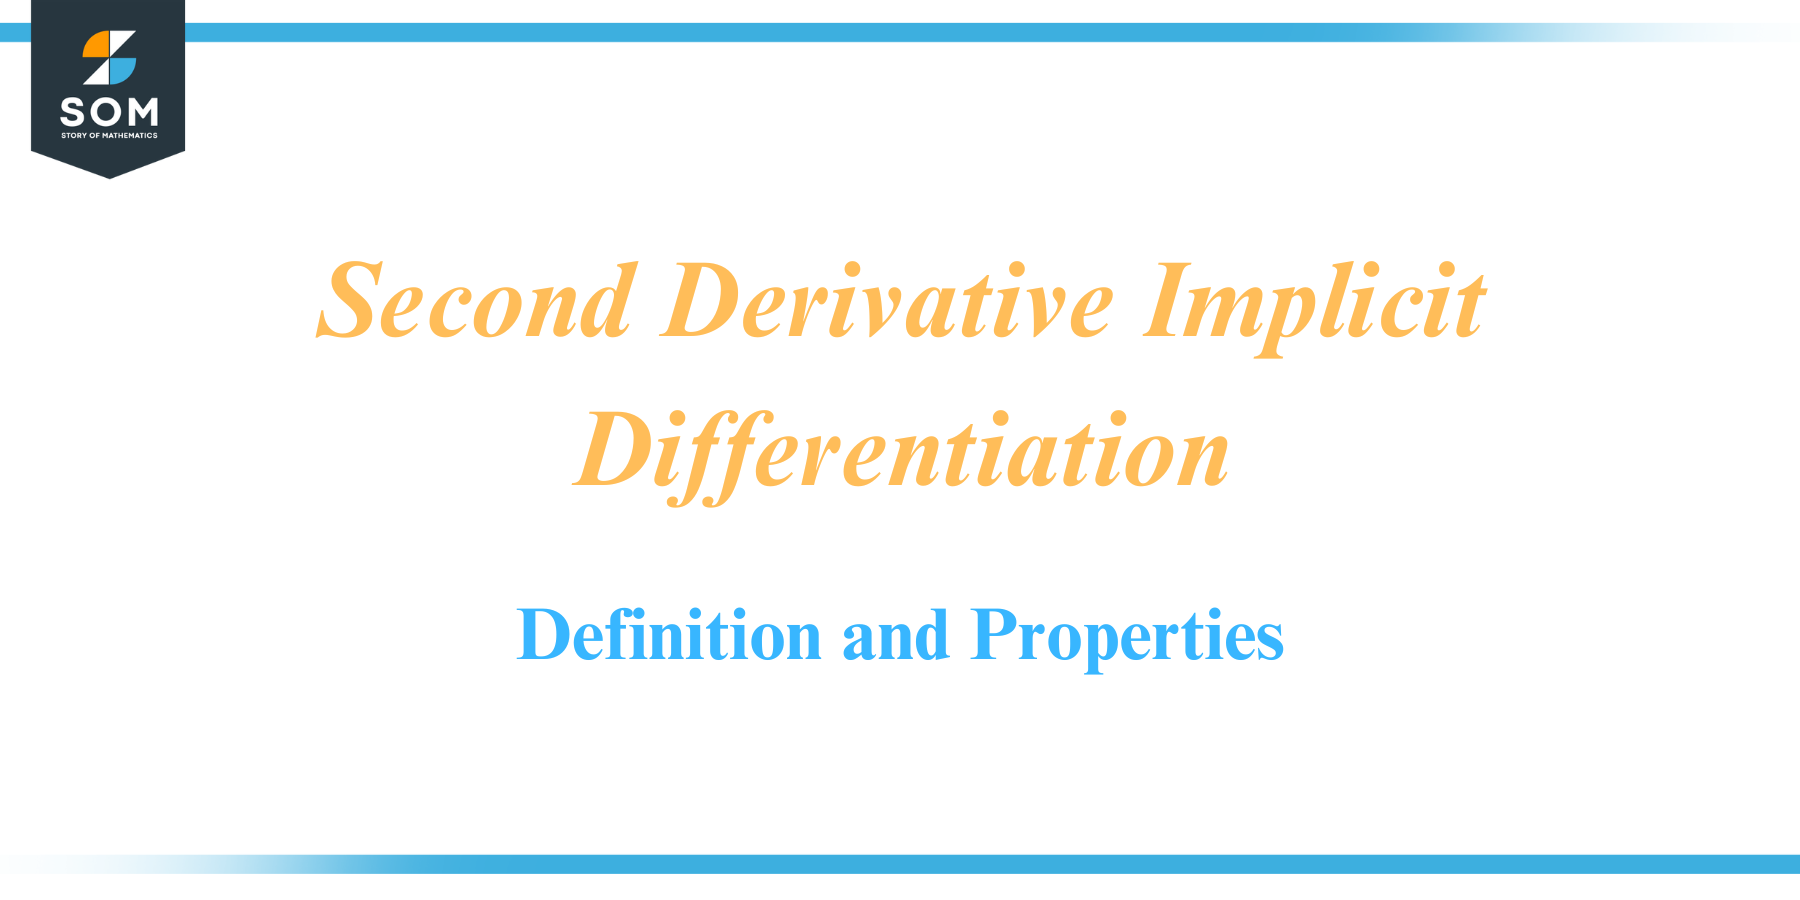 Second Derivative Implicit Differentiation Definition and Properties